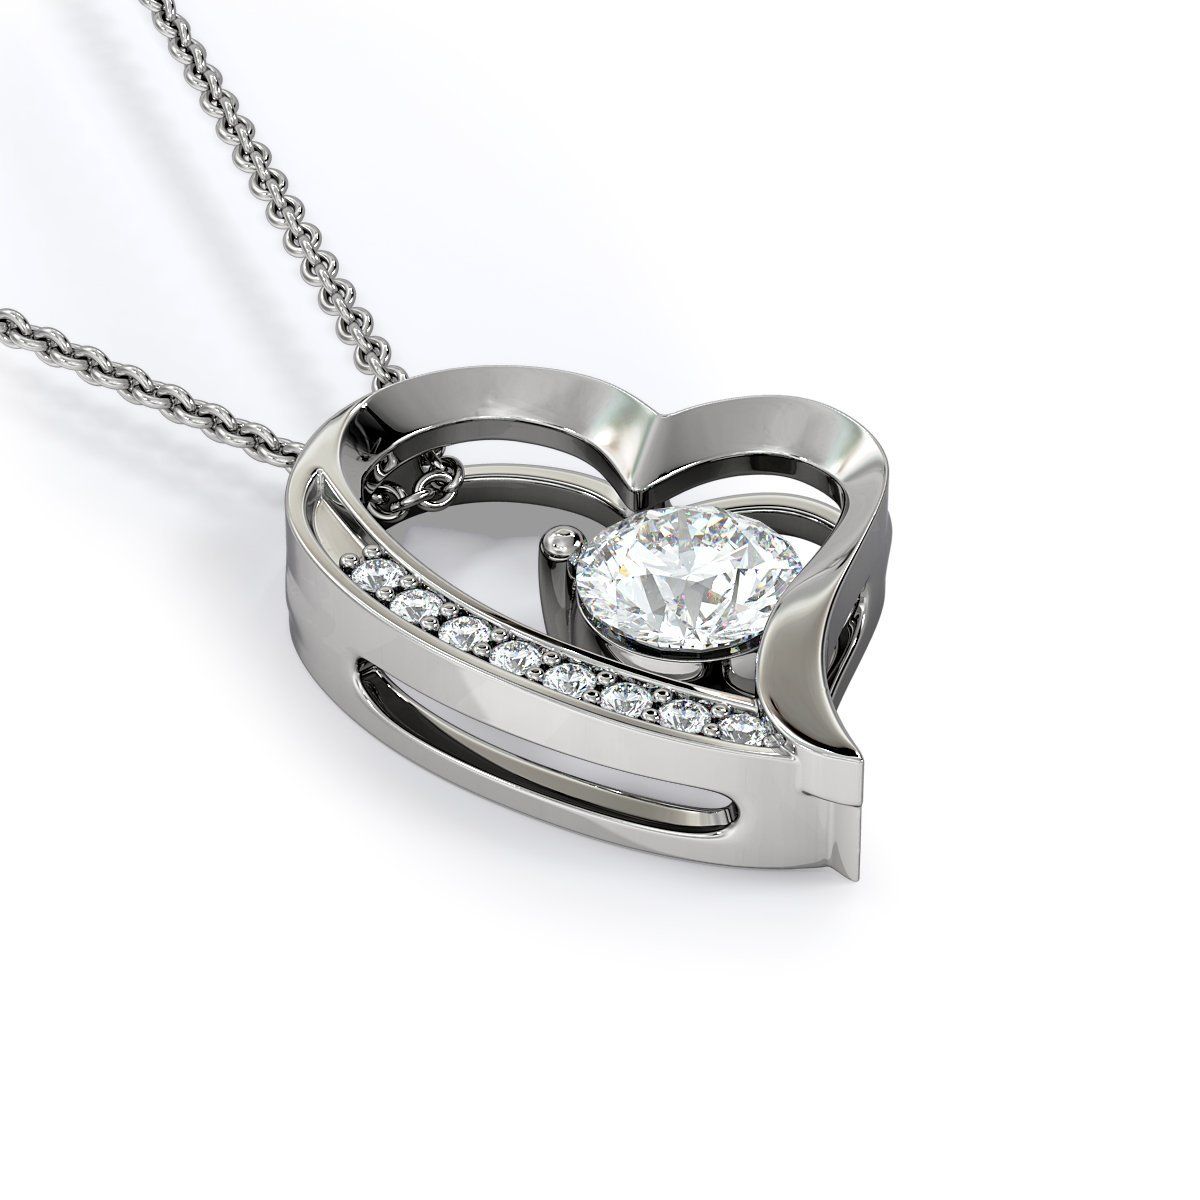 My Best Friend Faithful Partner Silver Forever Love Necklace Gift For Fiancee